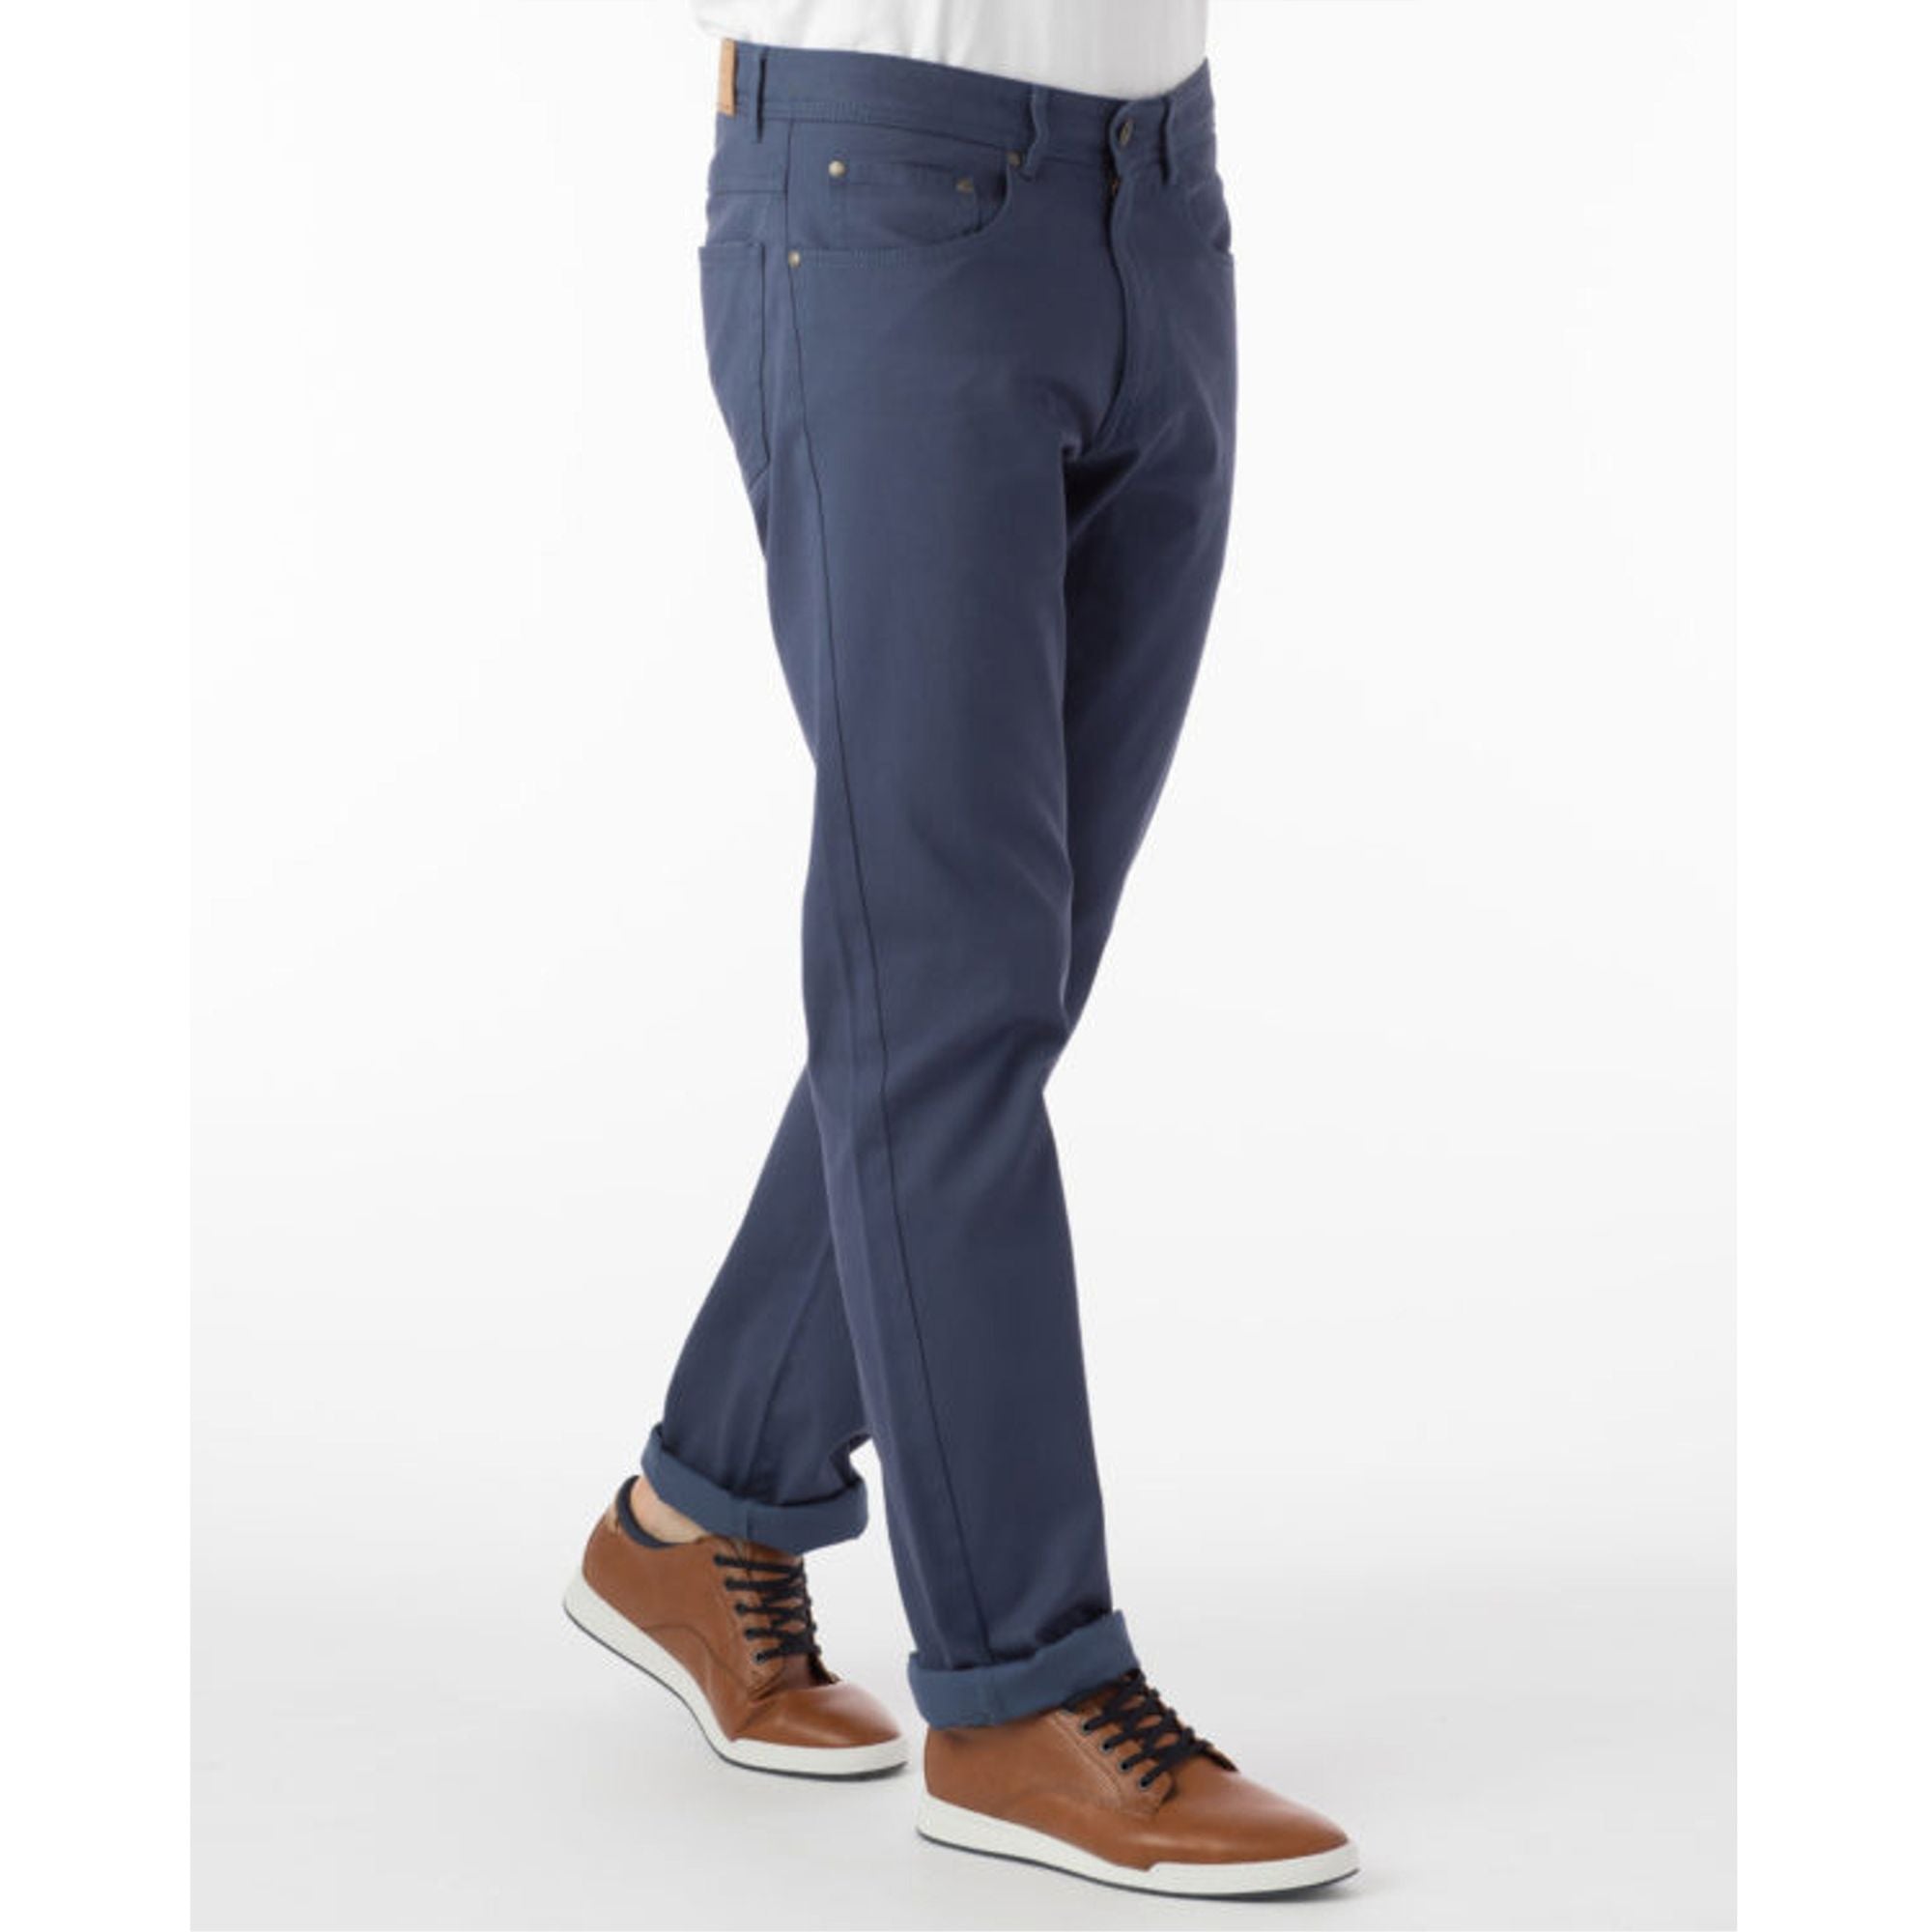 Perma Color Pima Twill 5-Pocket Pants In Fatigue (Crescent Modern Fit) By  Ballin